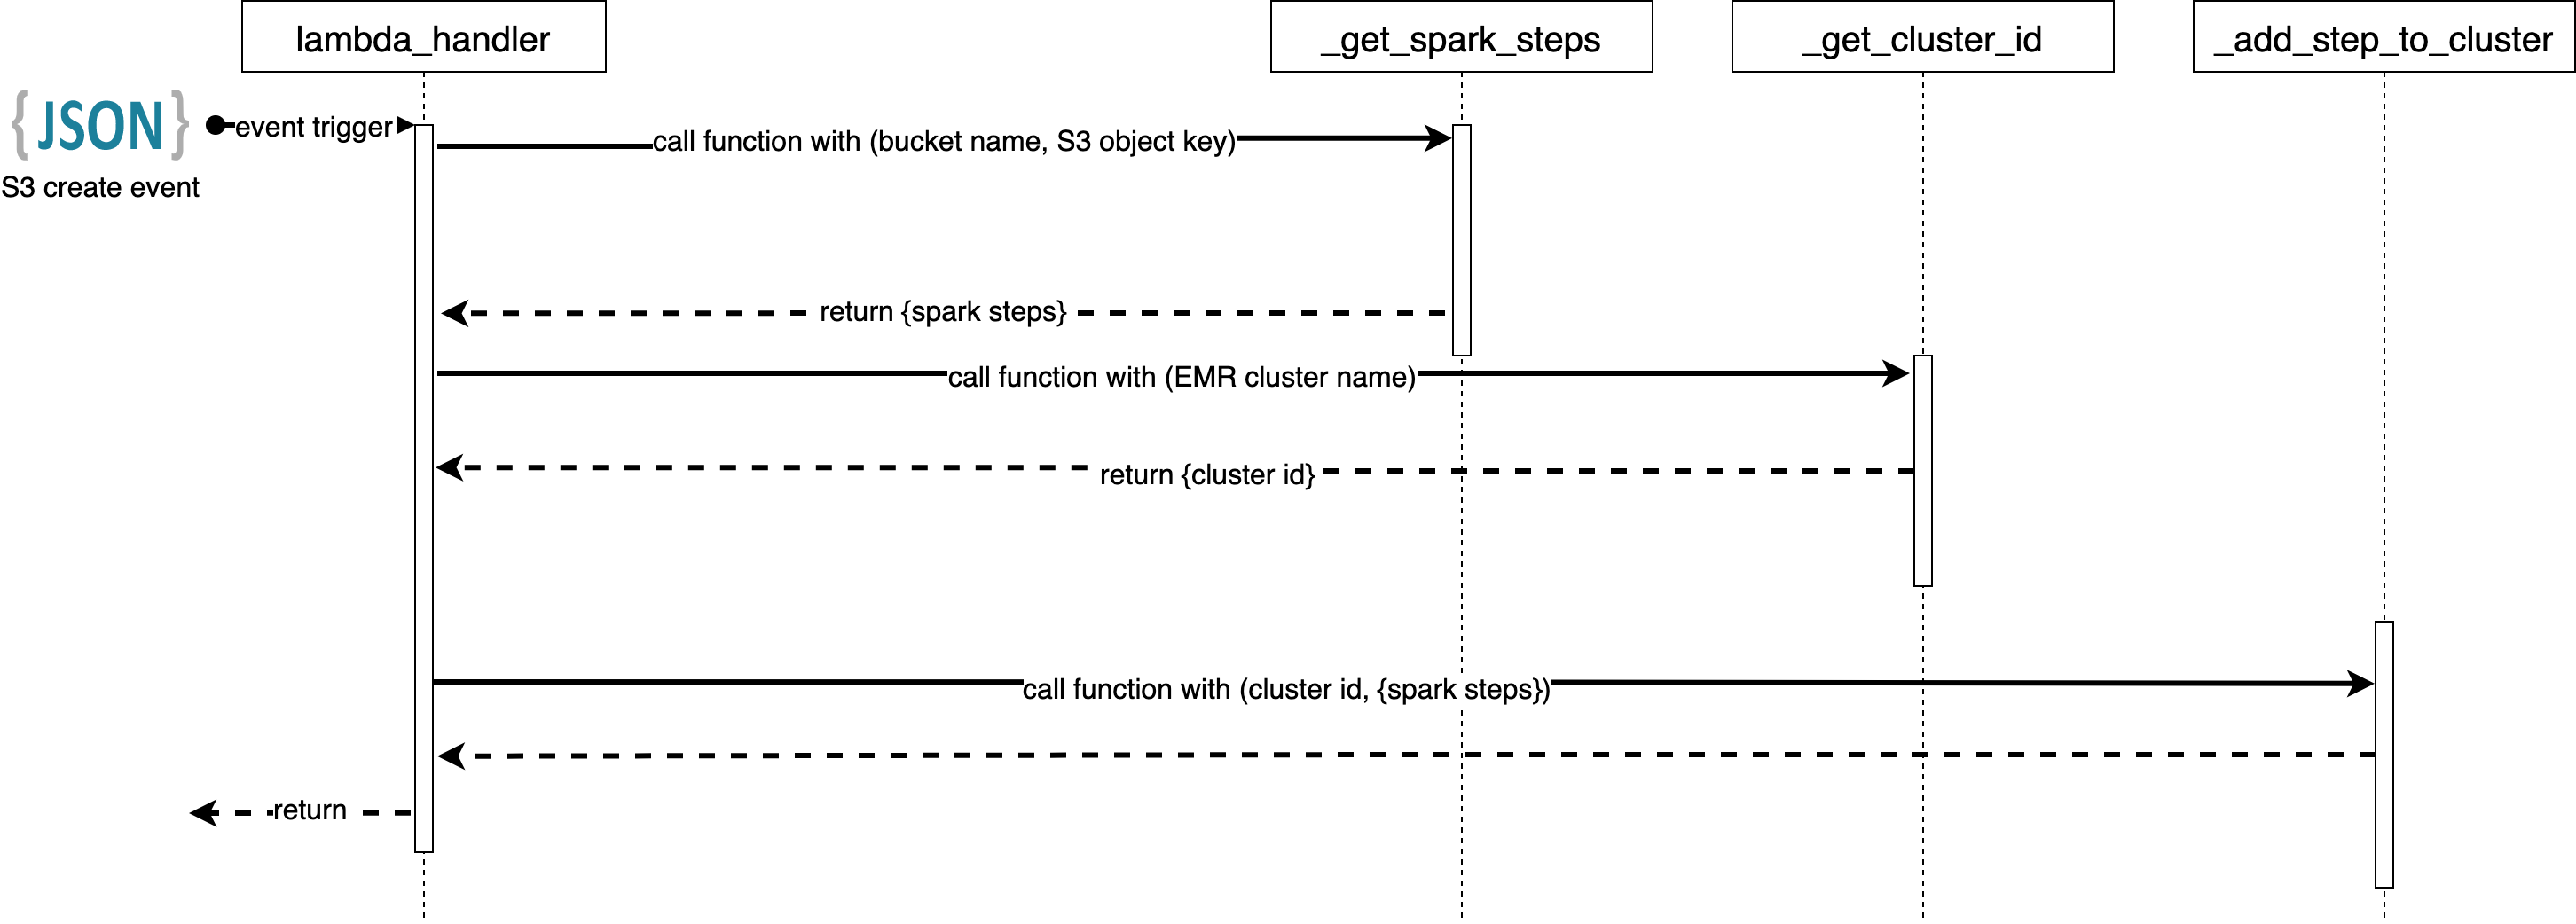 Code flow sequence diagram